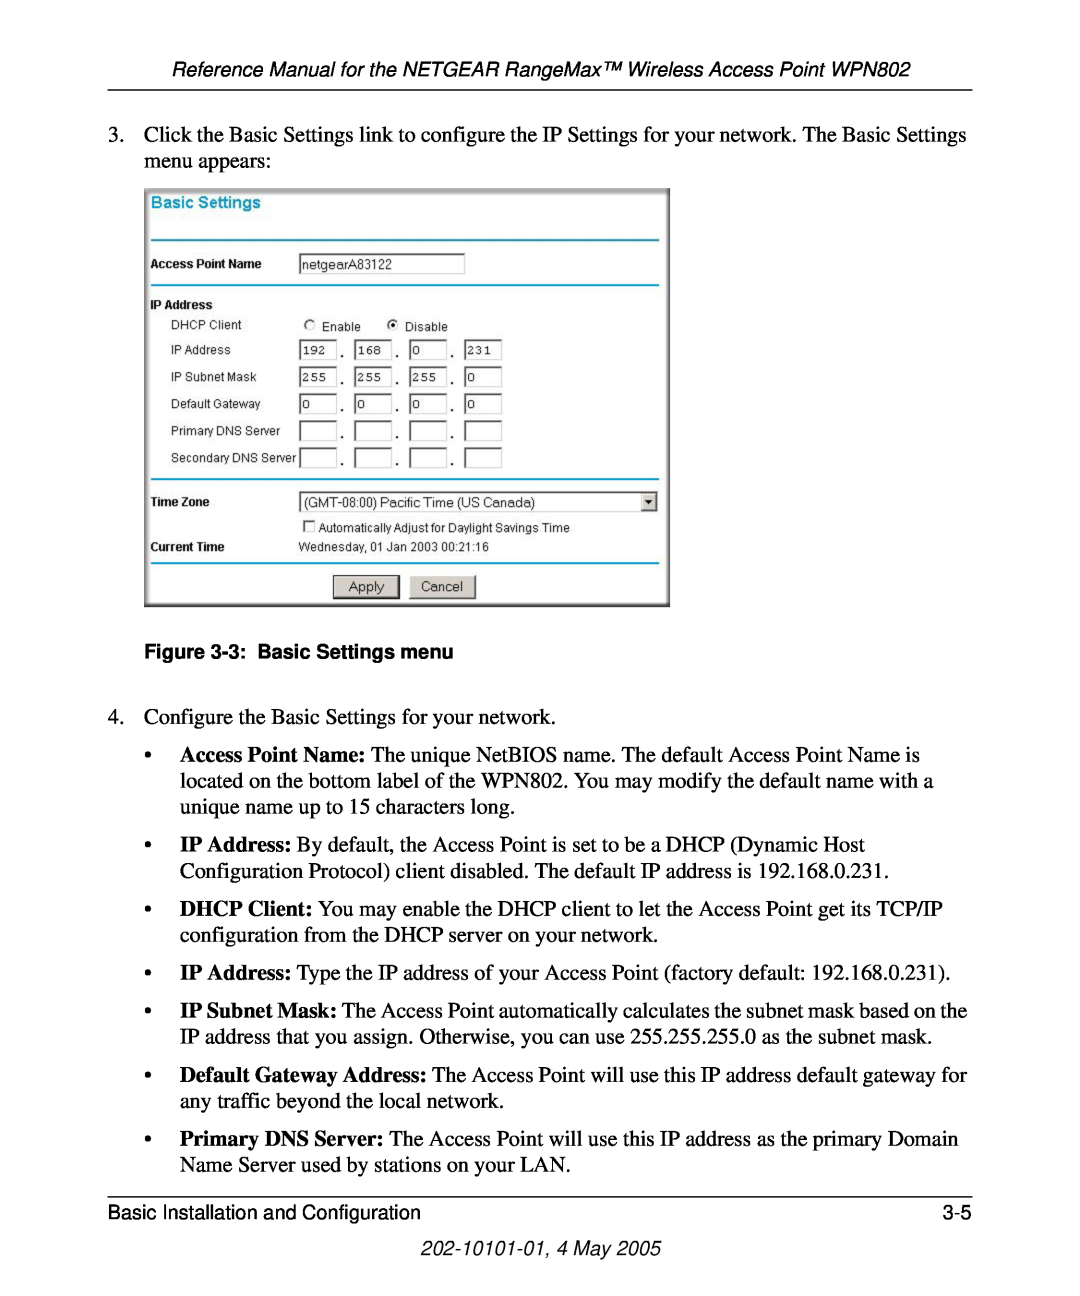 NETGEAR WPN802 manual Configure the Basic Settings for your network 